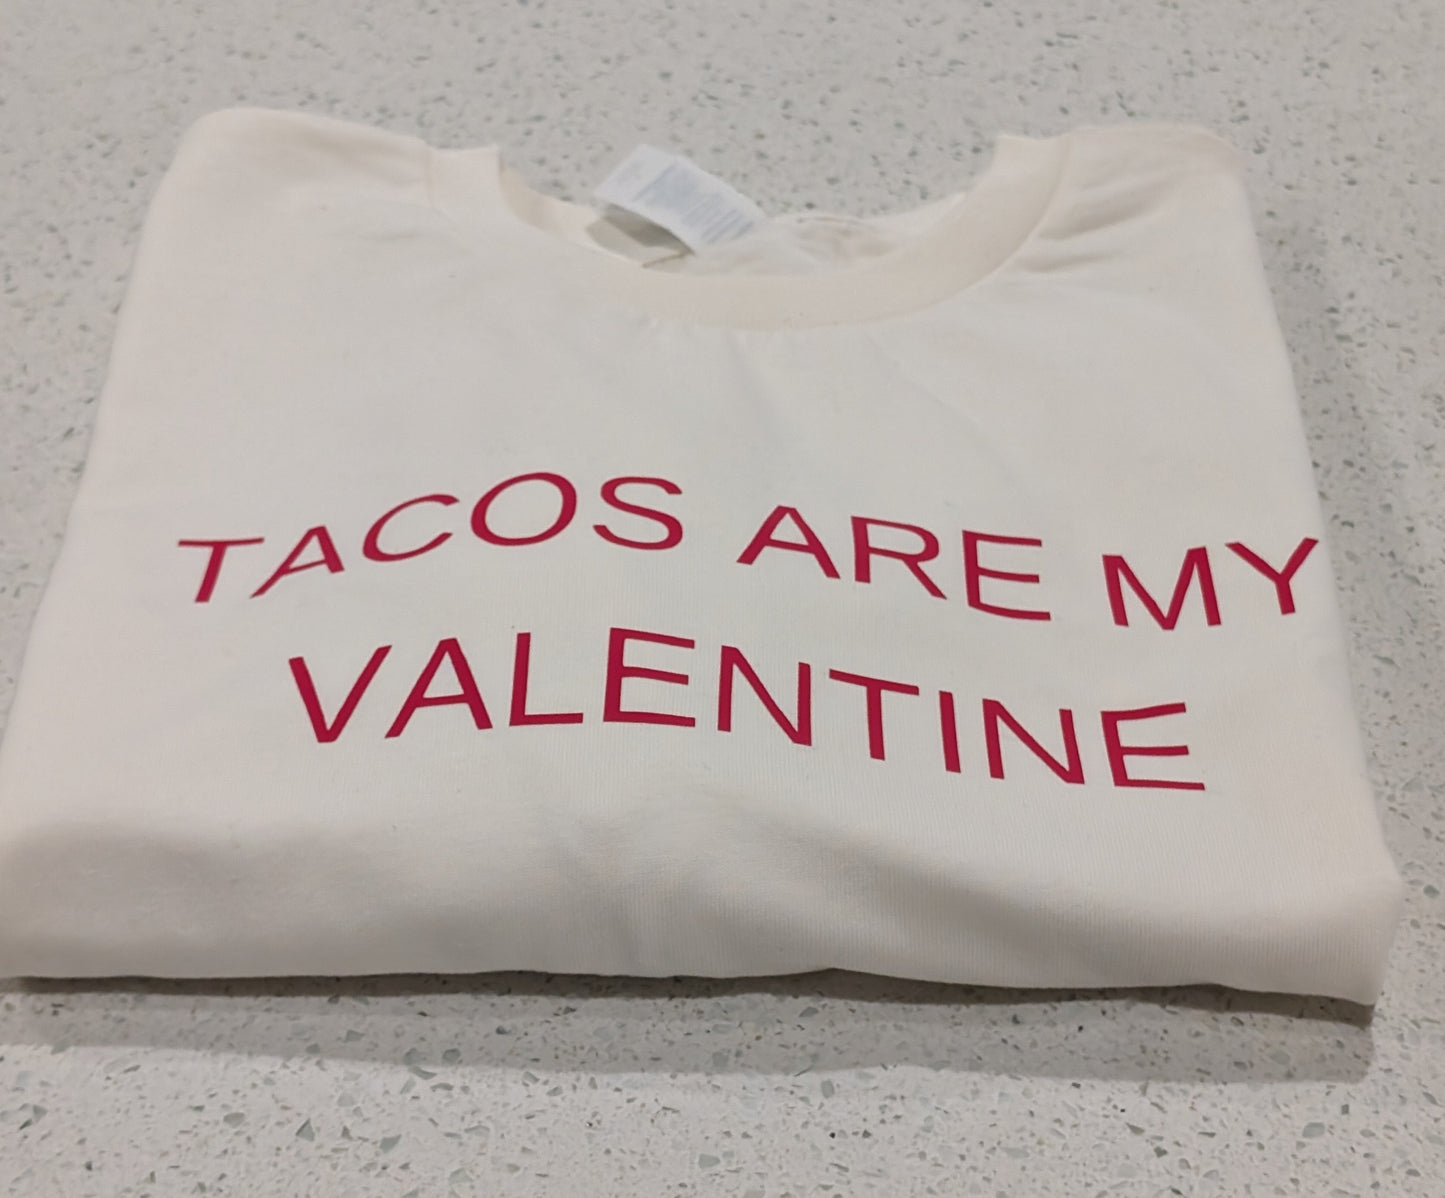 Tacos are my Valentine